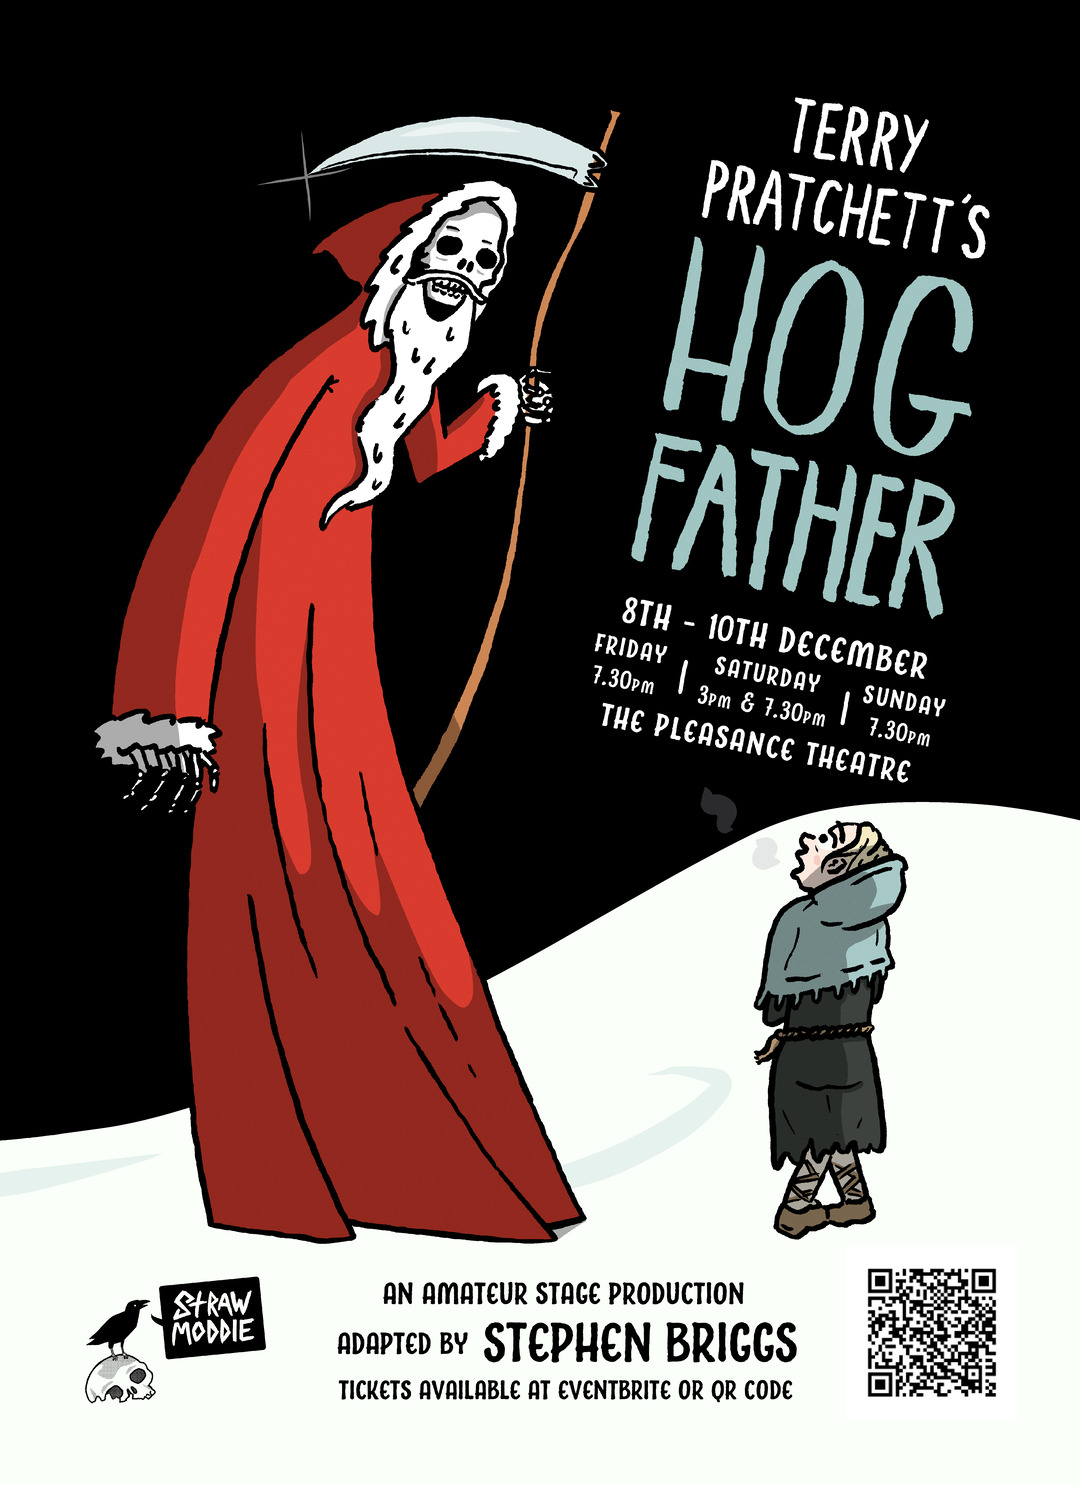 Picture of the Hogfather talking to the little match girl